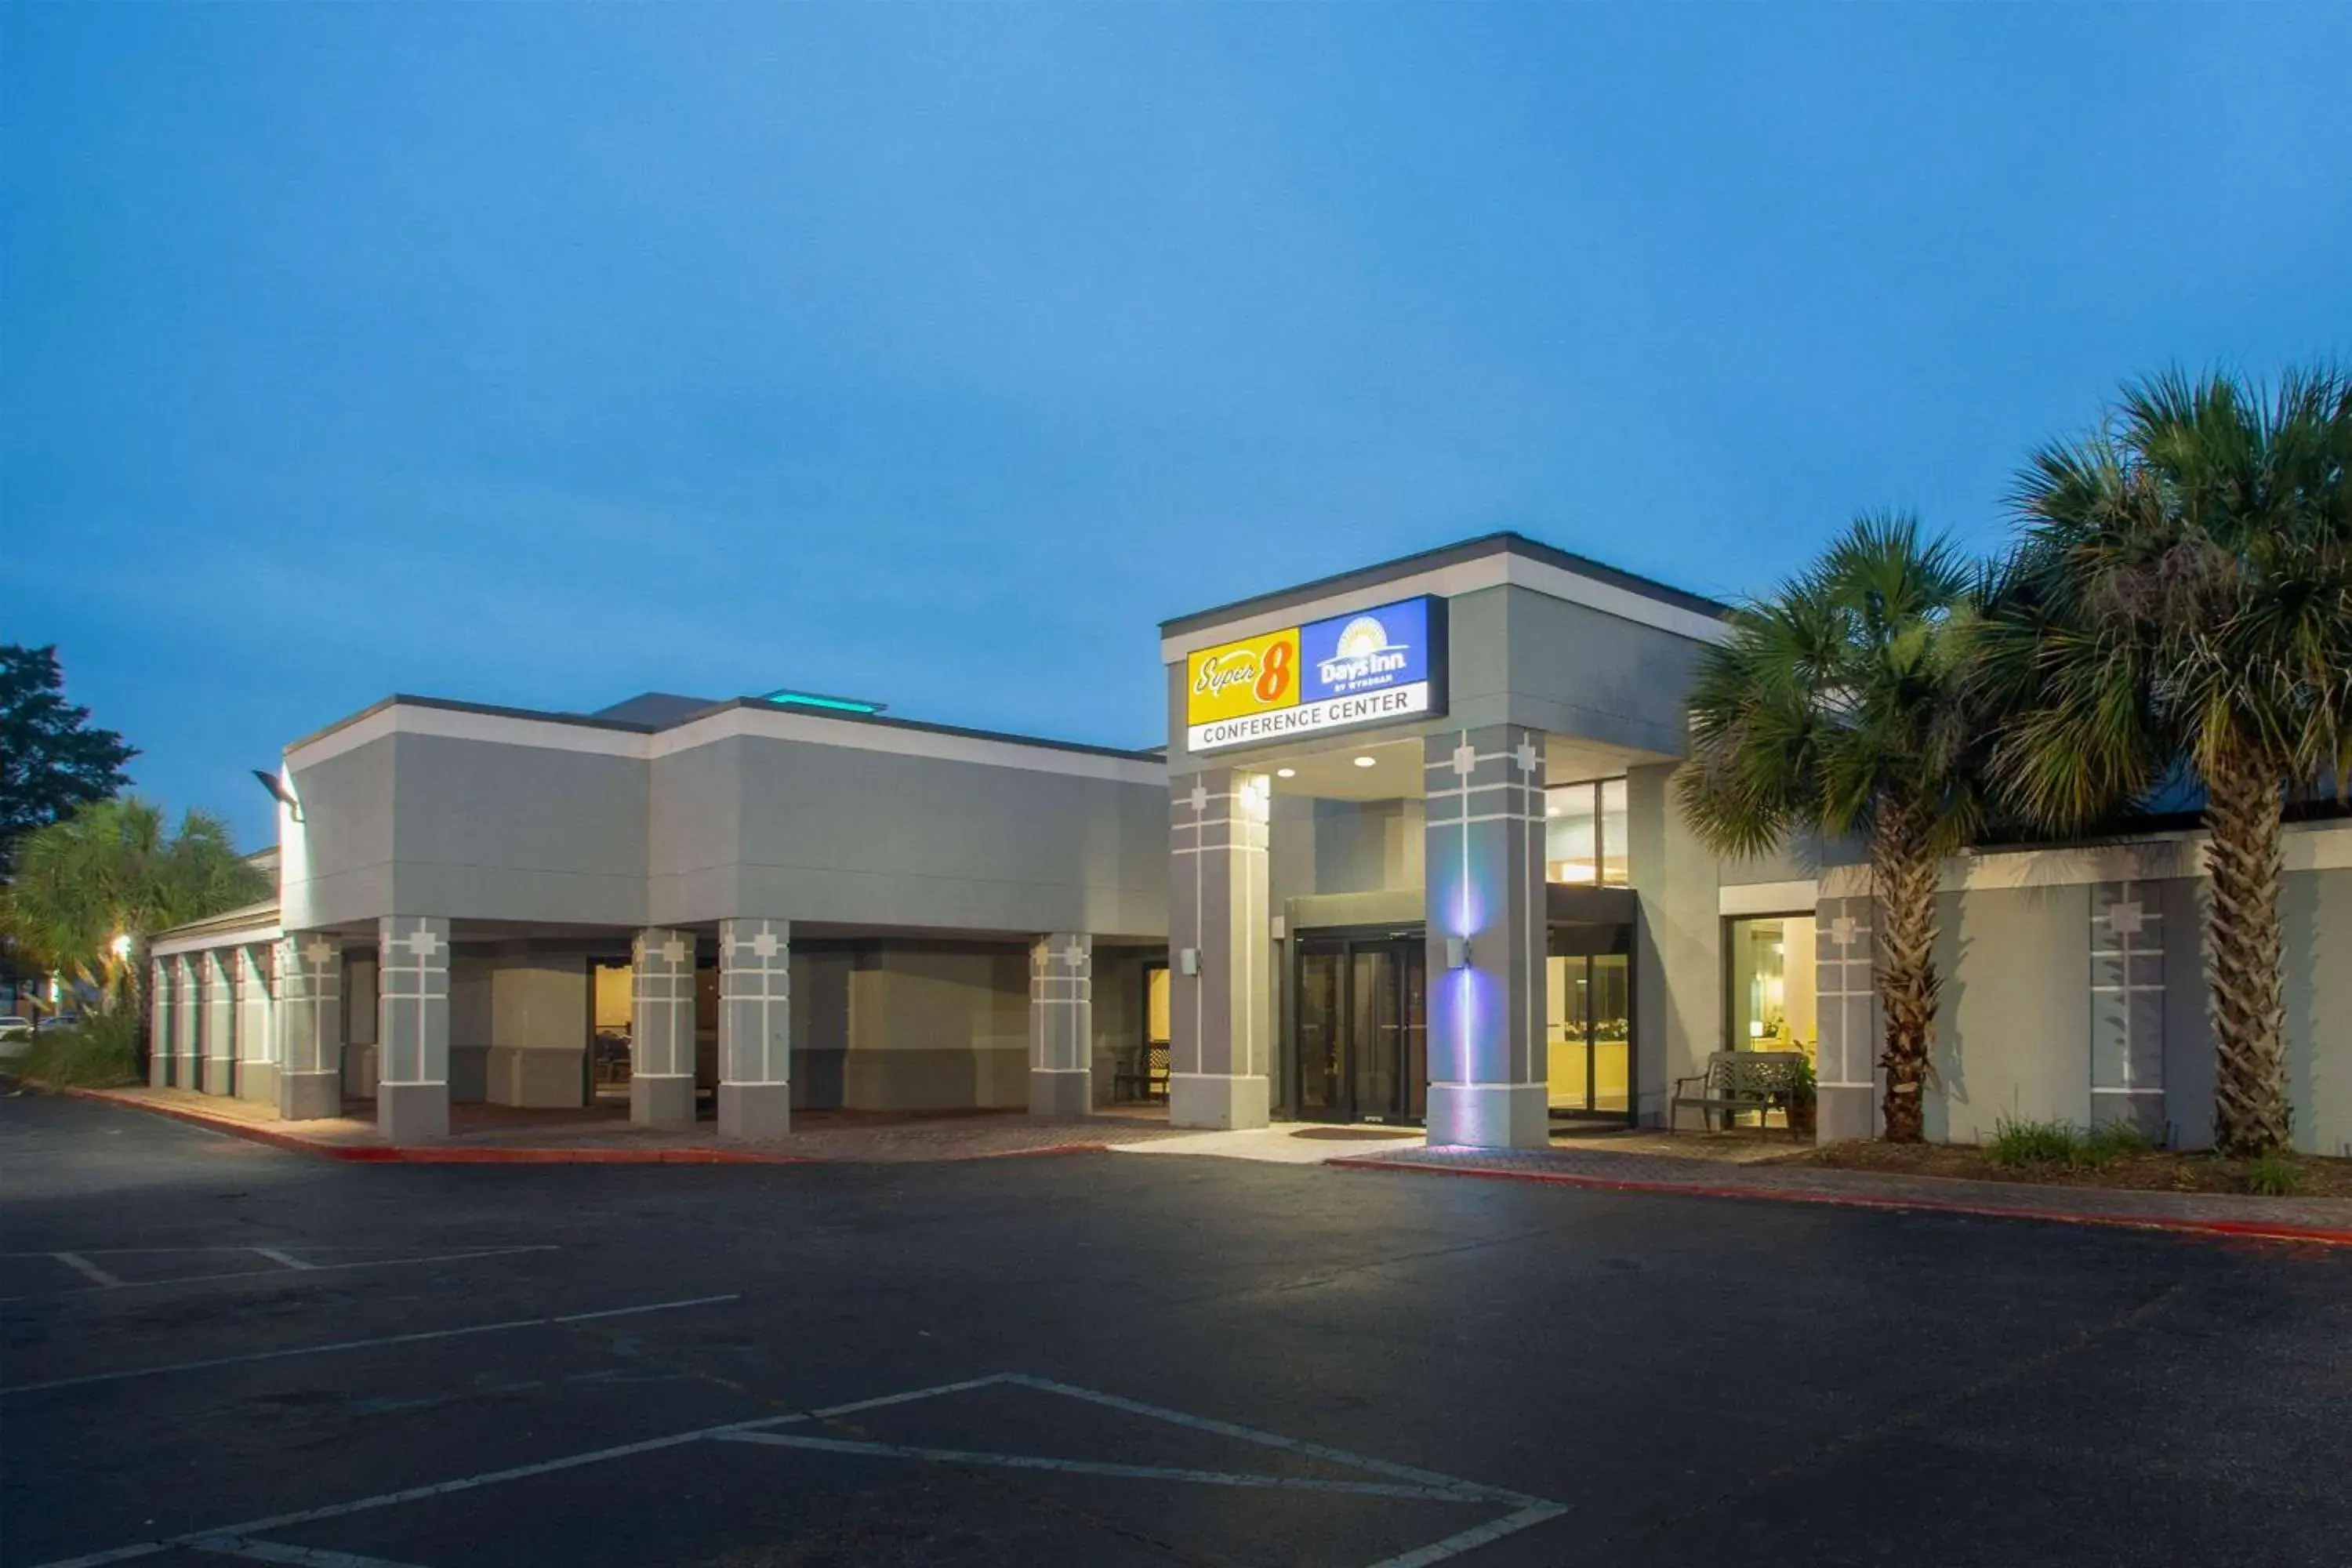 Property Building in Days Inn by Wyndham Mobile I-65